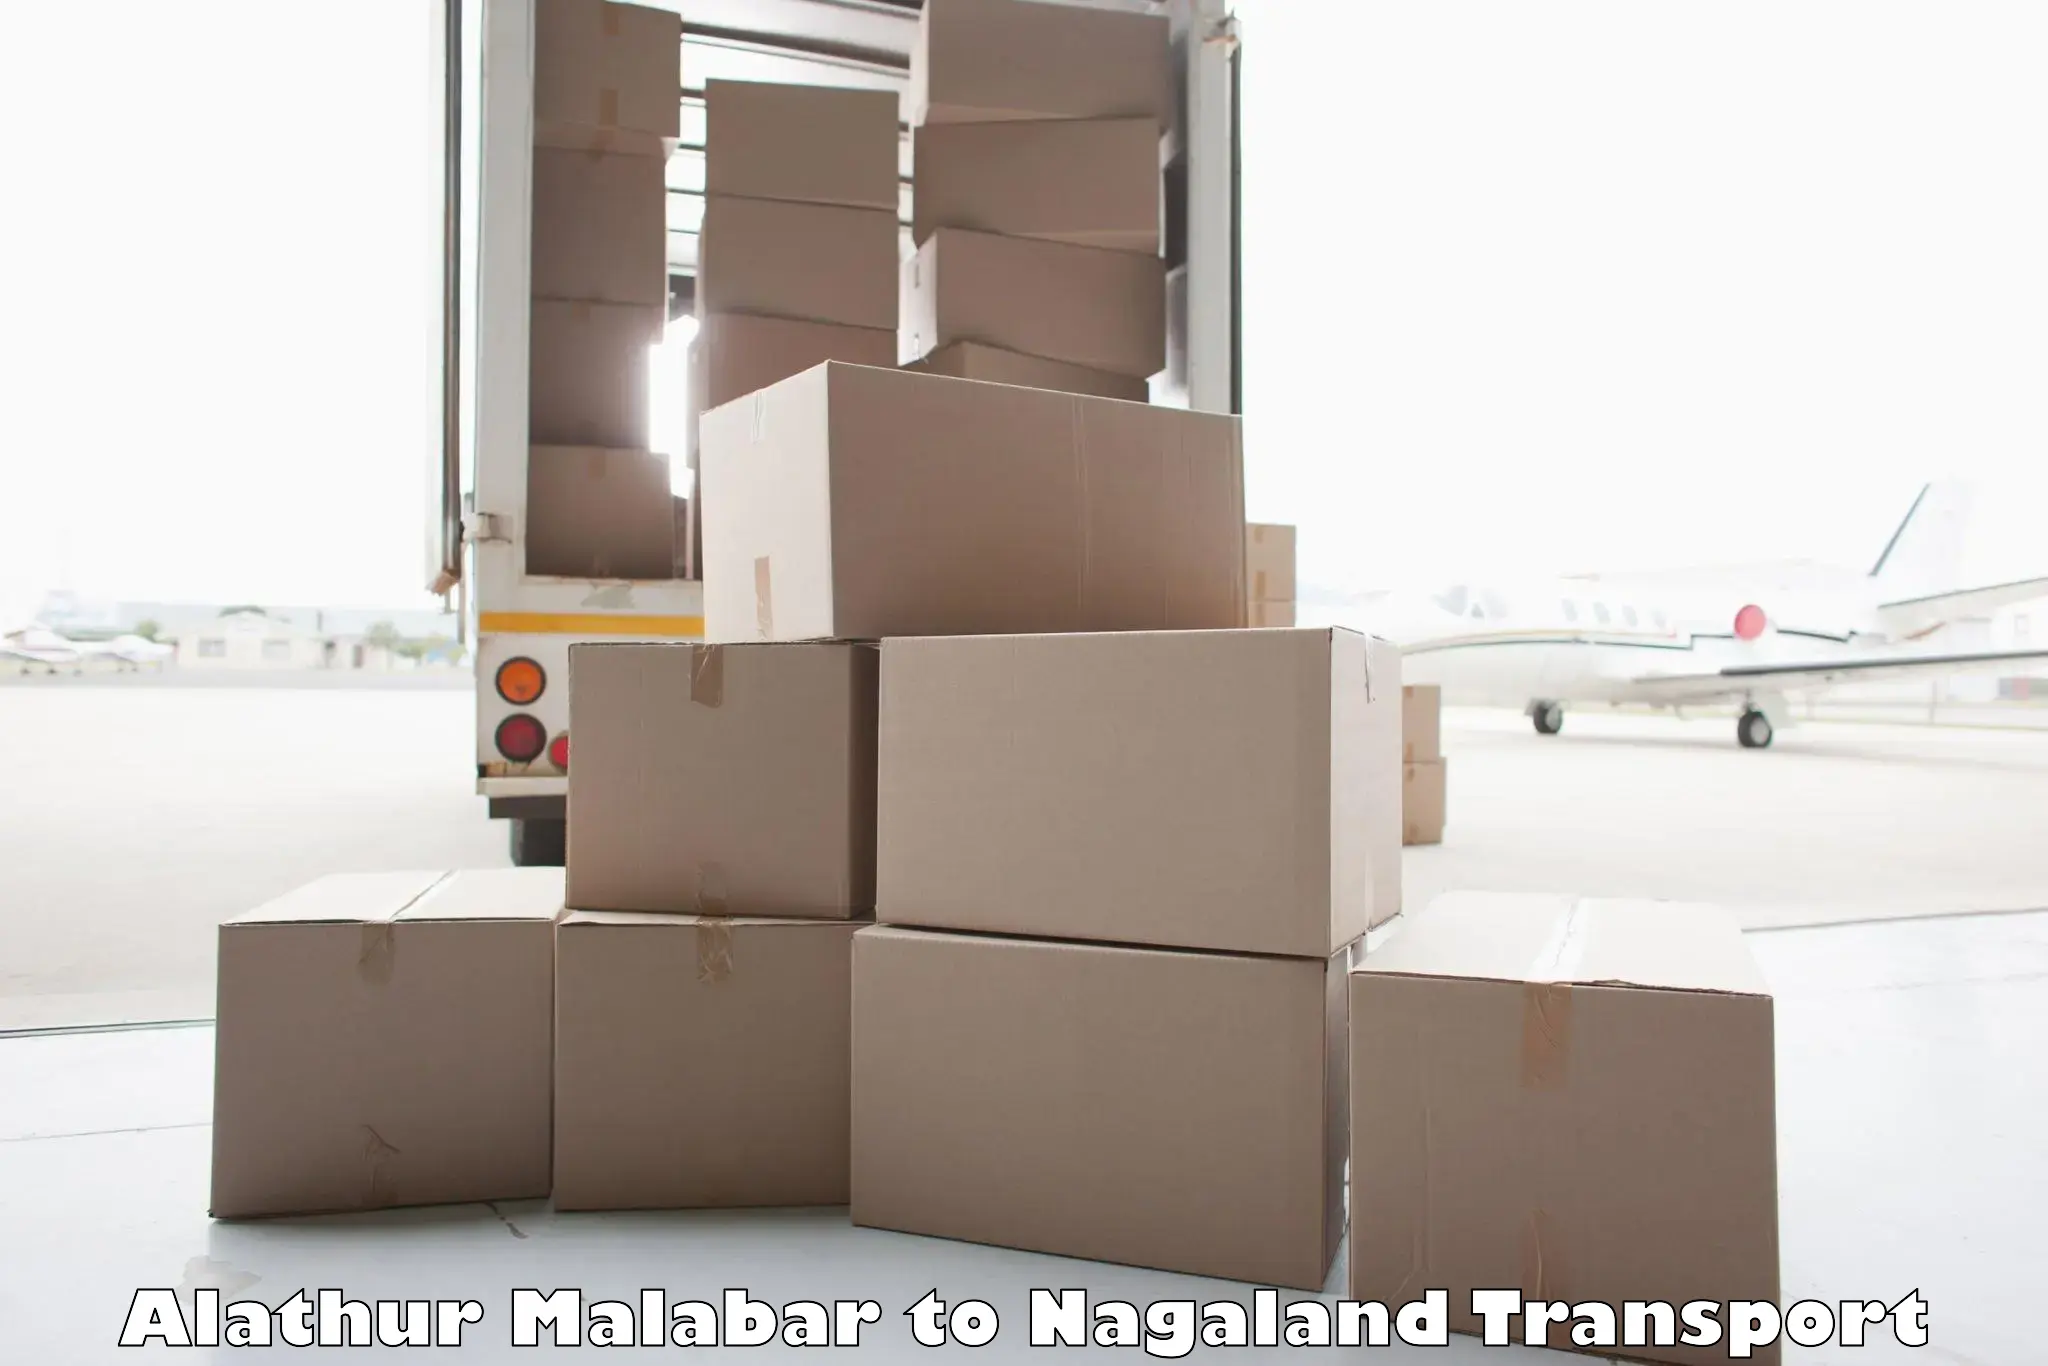 Vehicle transport services in Alathur Malabar to Dimapur